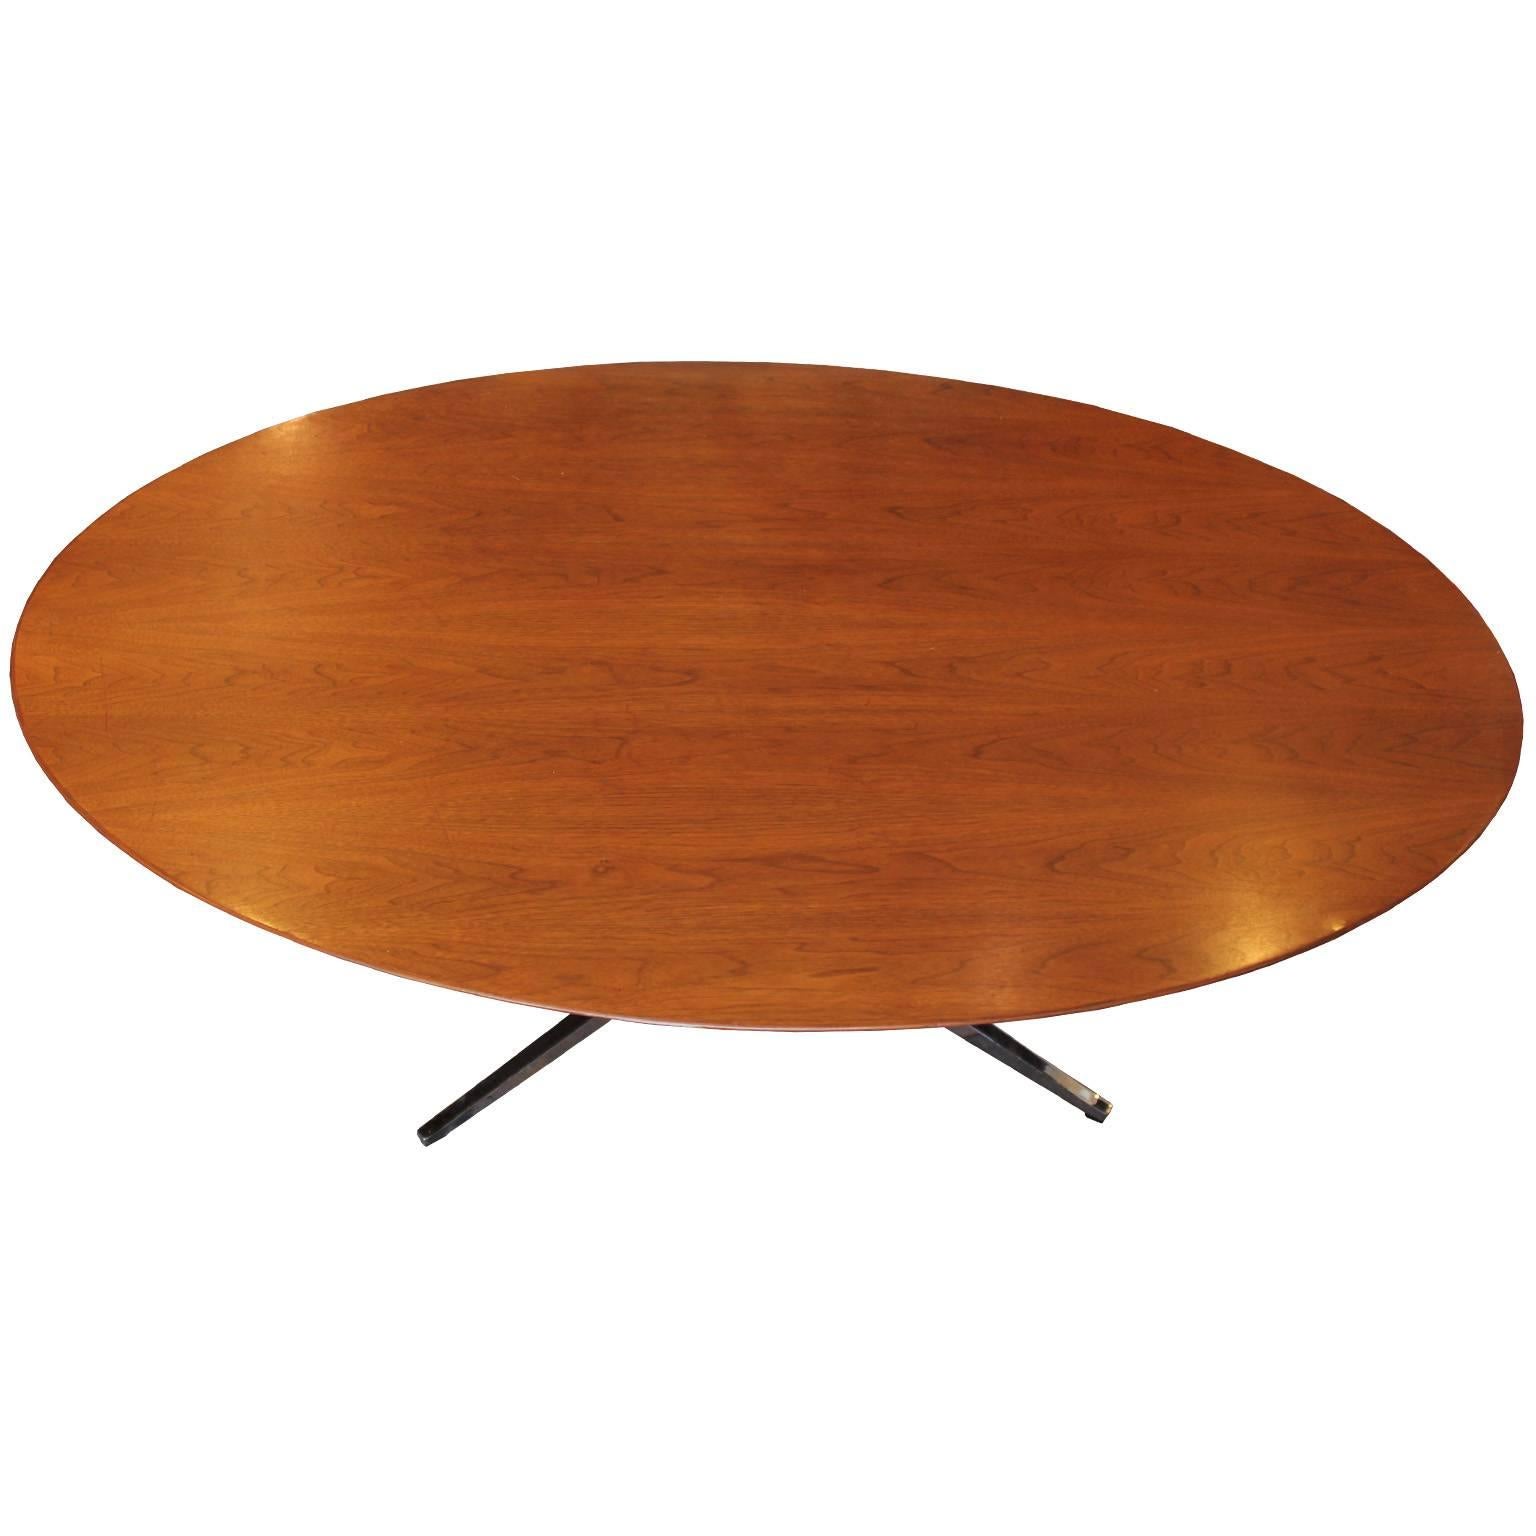 Oval shaped dining or conference table designed by Florence Knoll. Walnut top has beautiful graining. Iconic chrome base. The chrome has some wear to the feet of the base noticeable when up close. The top is in nice vintage condition with slight